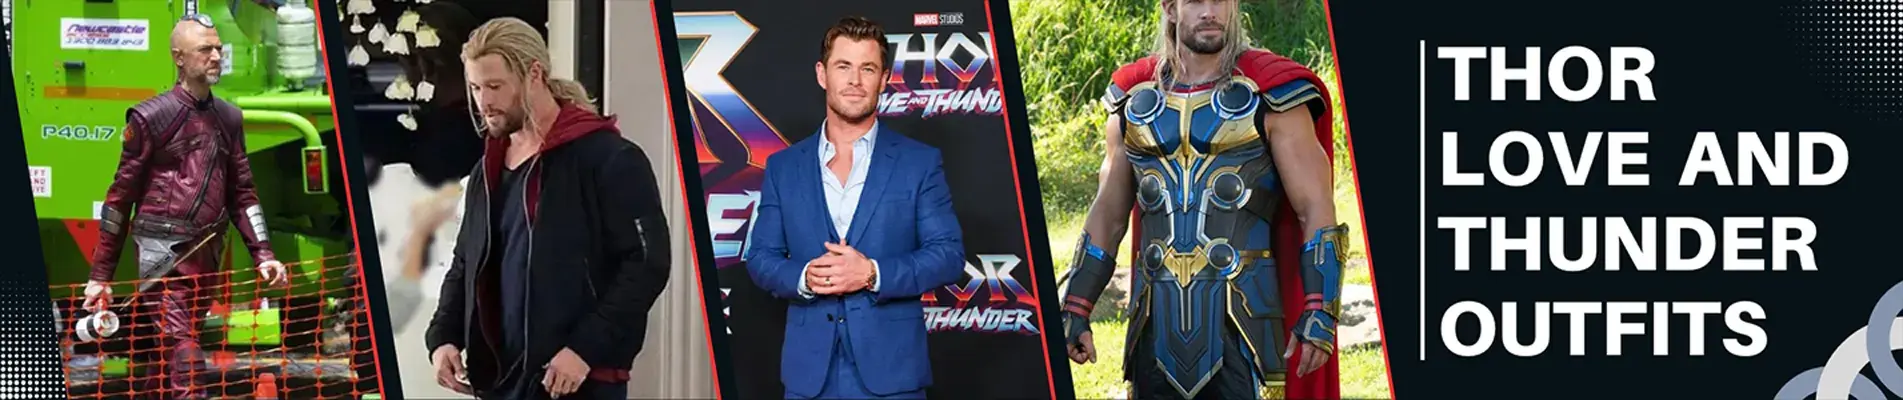 Thor Love and Thunder Outfits